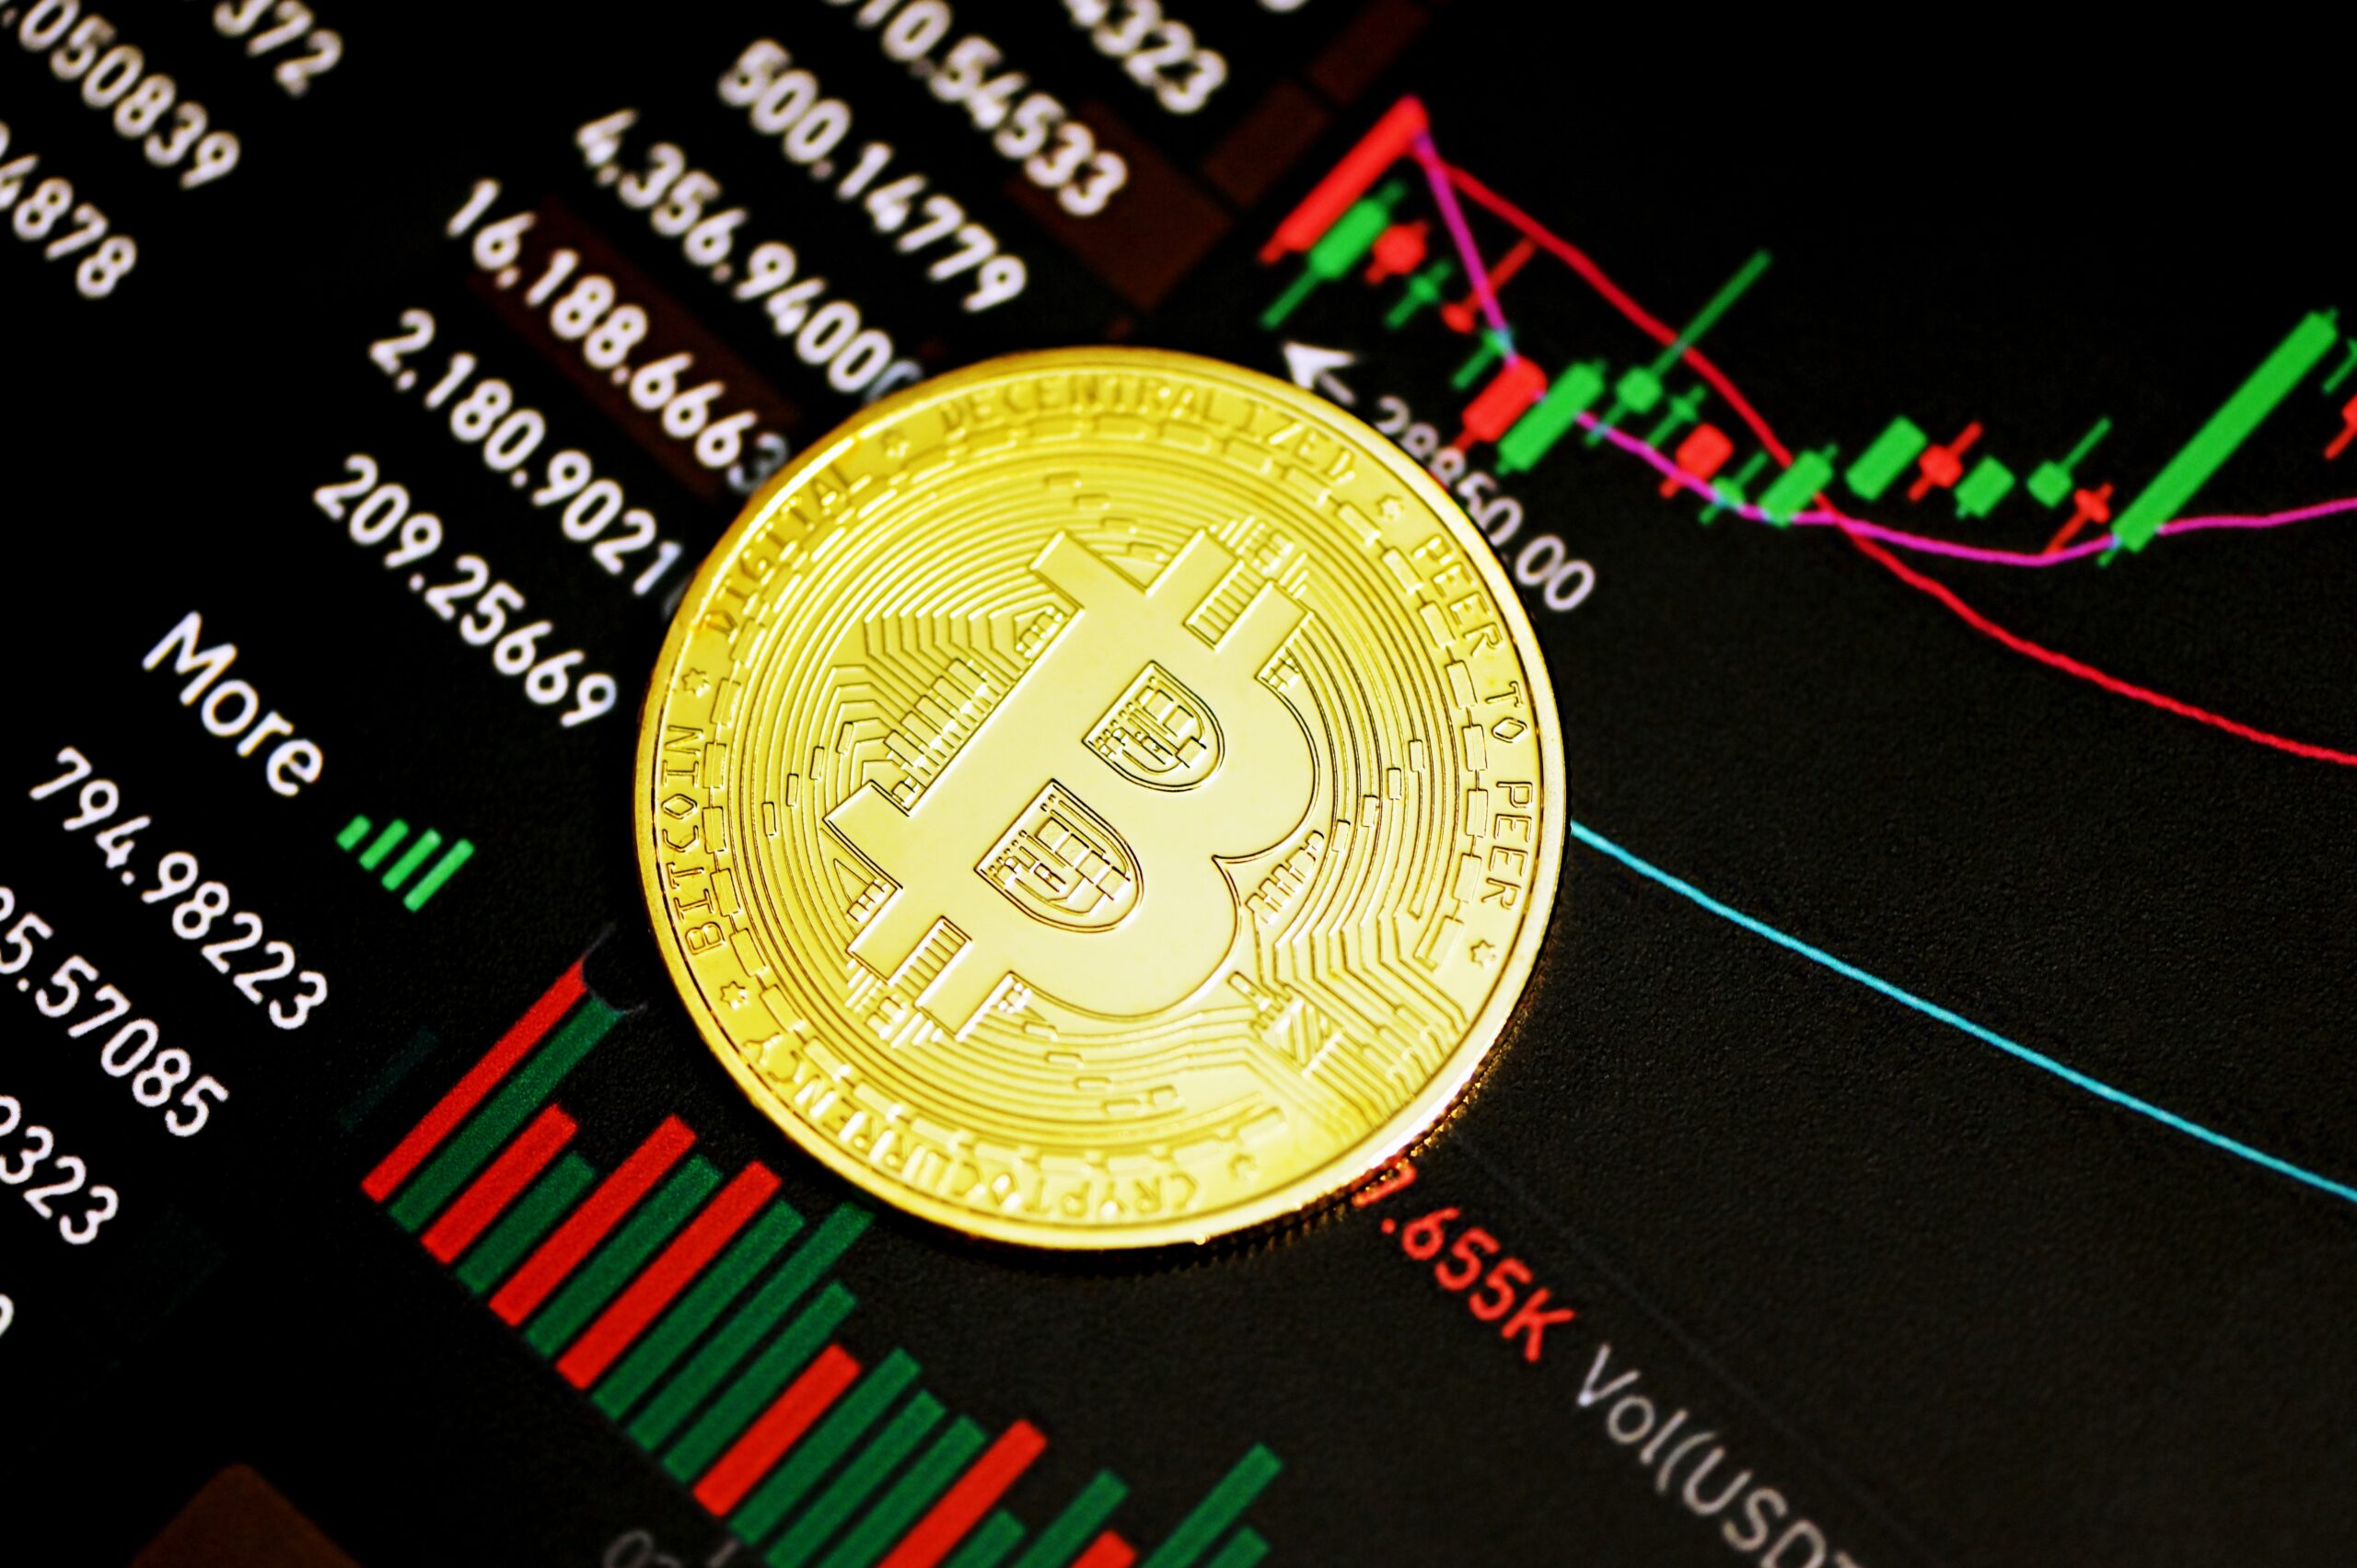 Crypto Market Watches Closely as Bitcoin Options Worth $1.3 Billion Expire